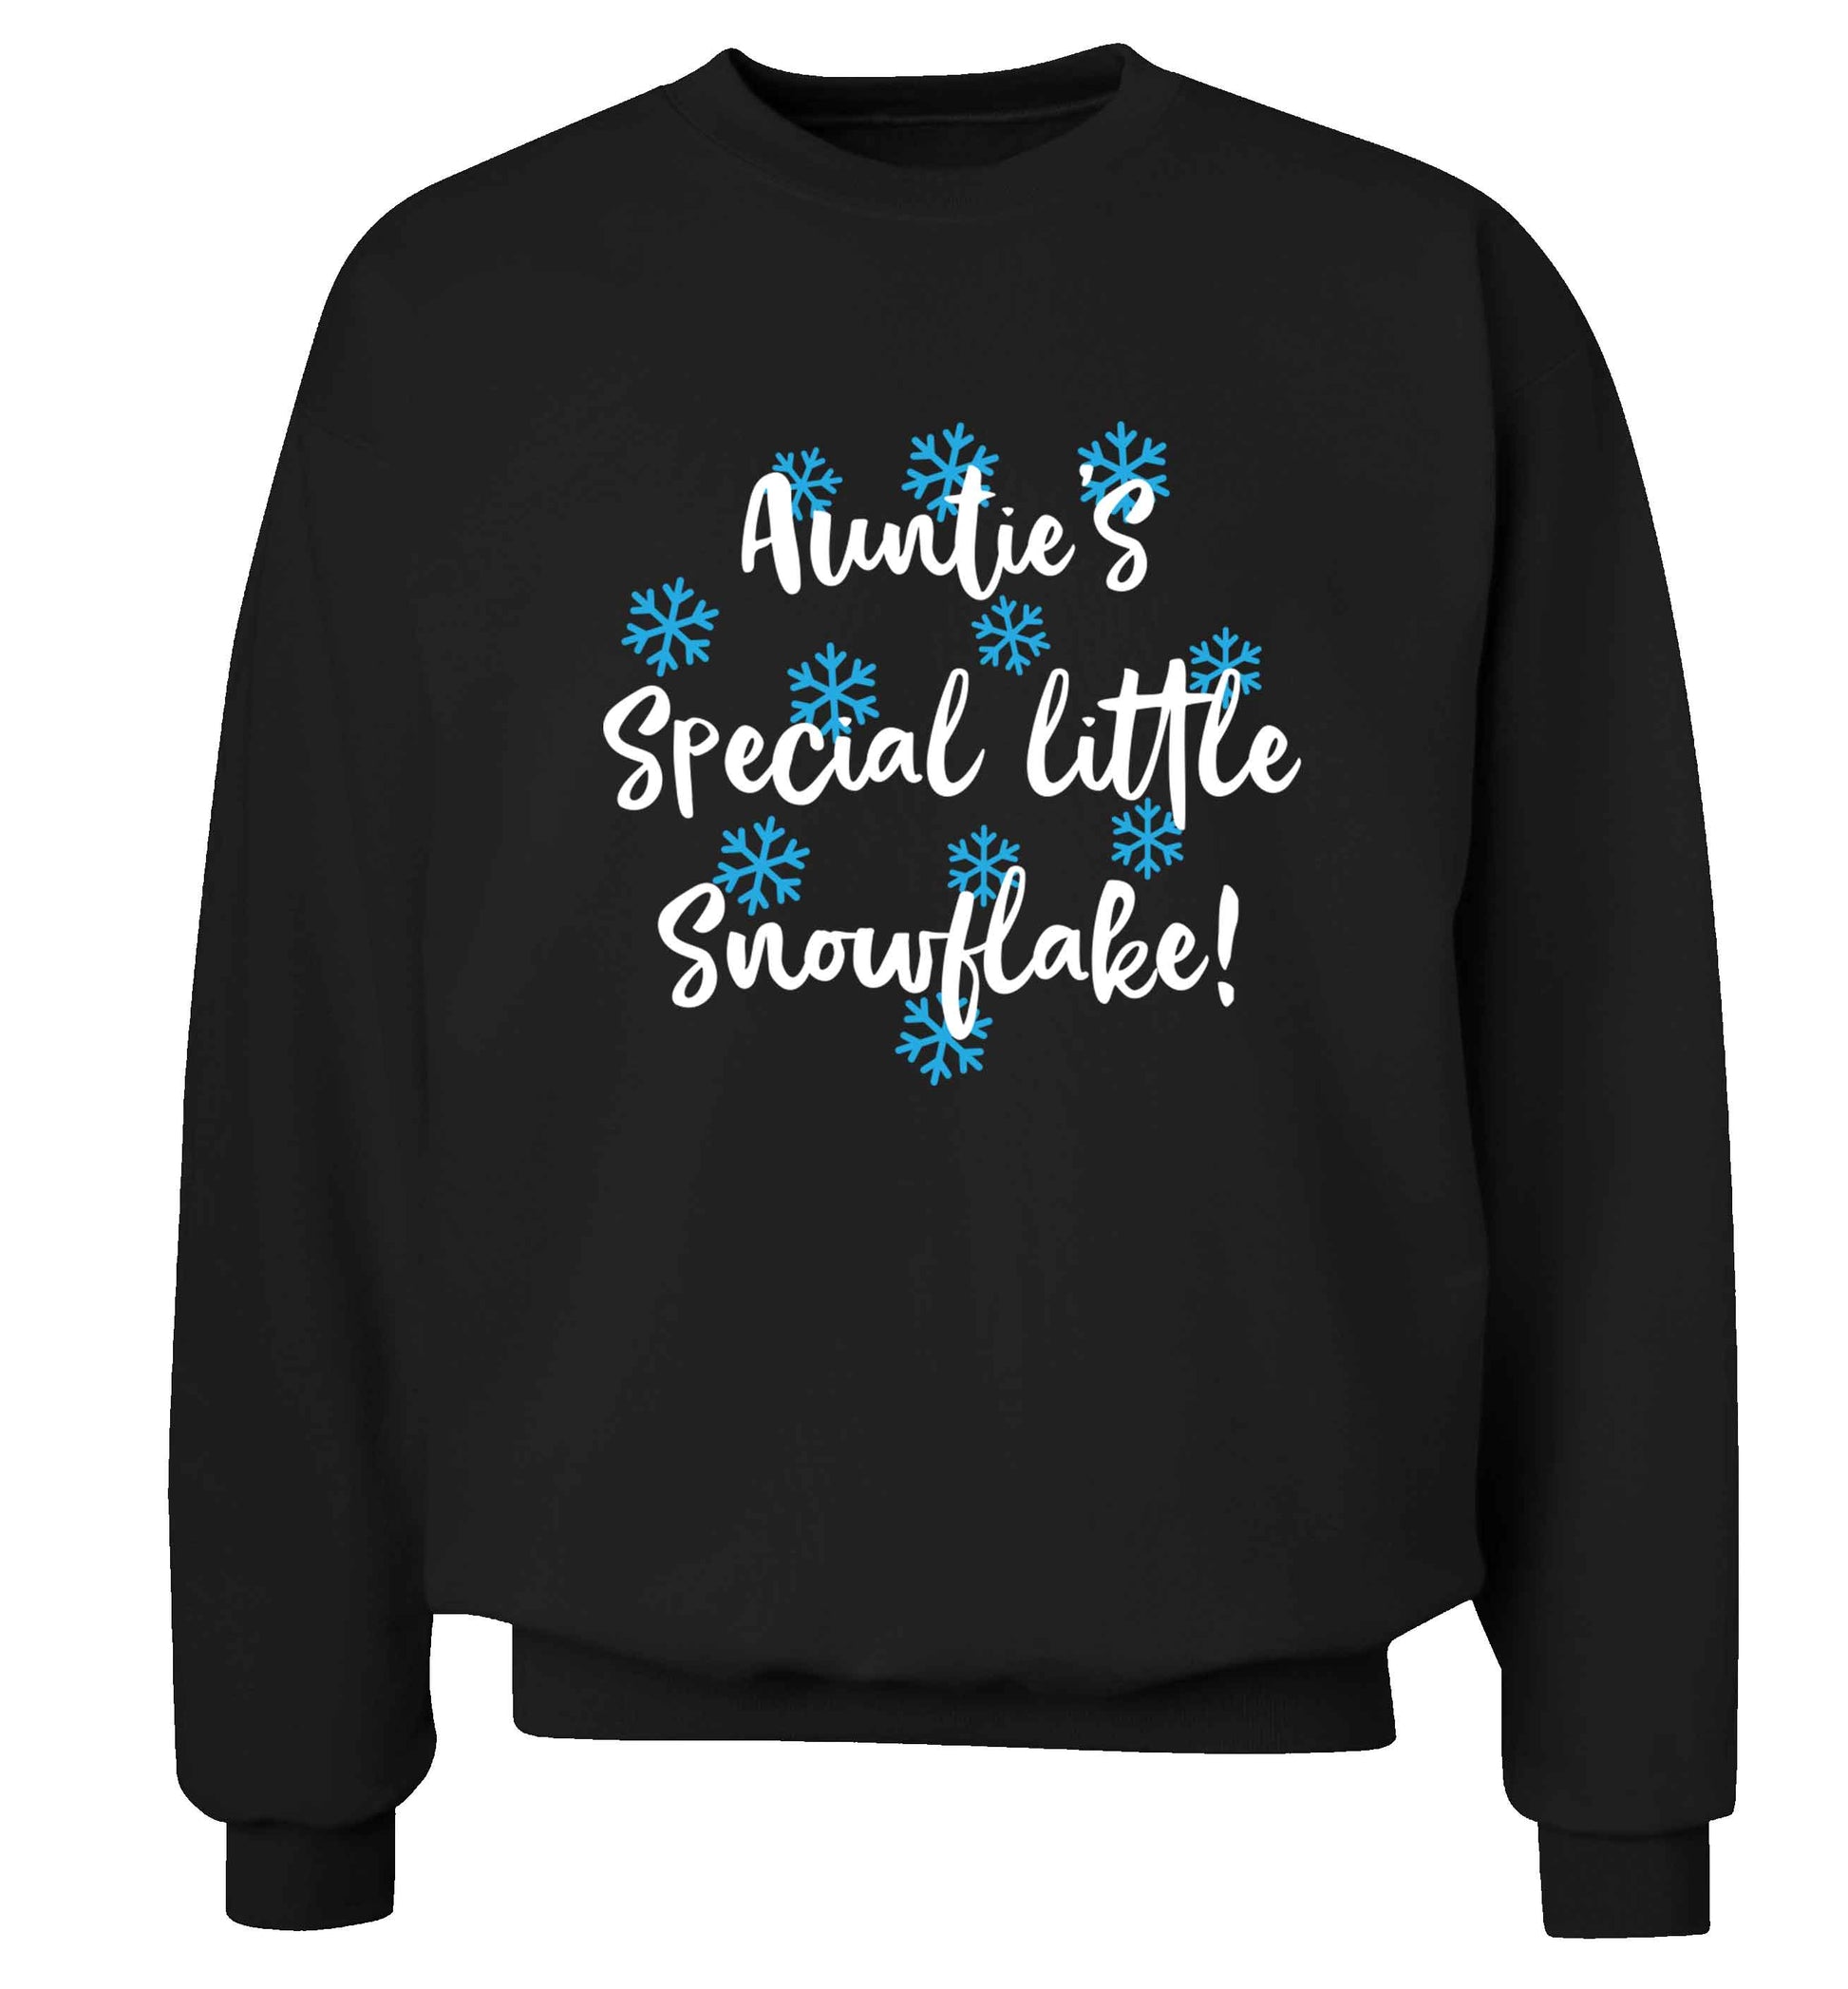 Auntie's special little snowflake Adult's unisex black Sweater 2XL